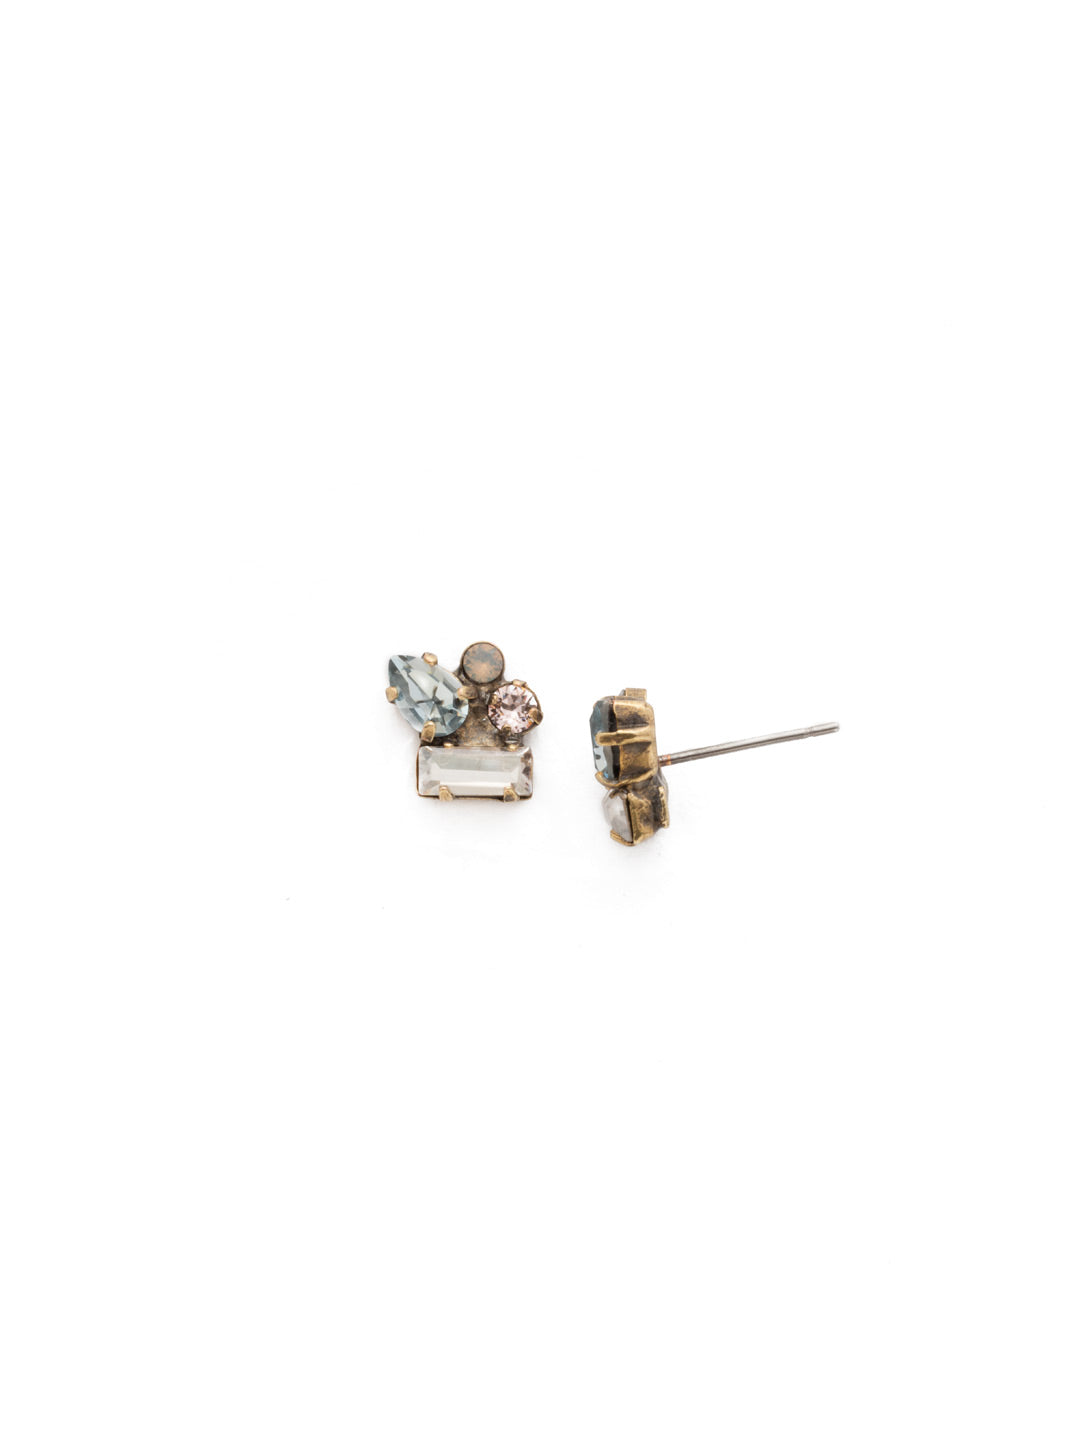 Charming Cluster Earring - EDN63AGCMI - <p>A cluster of petite crystals rests atop a brilliant baguette for a look that's subtle and sweet. From Sorrelli's Coastal Mist collection in our Antique Gold-tone finish.</p>